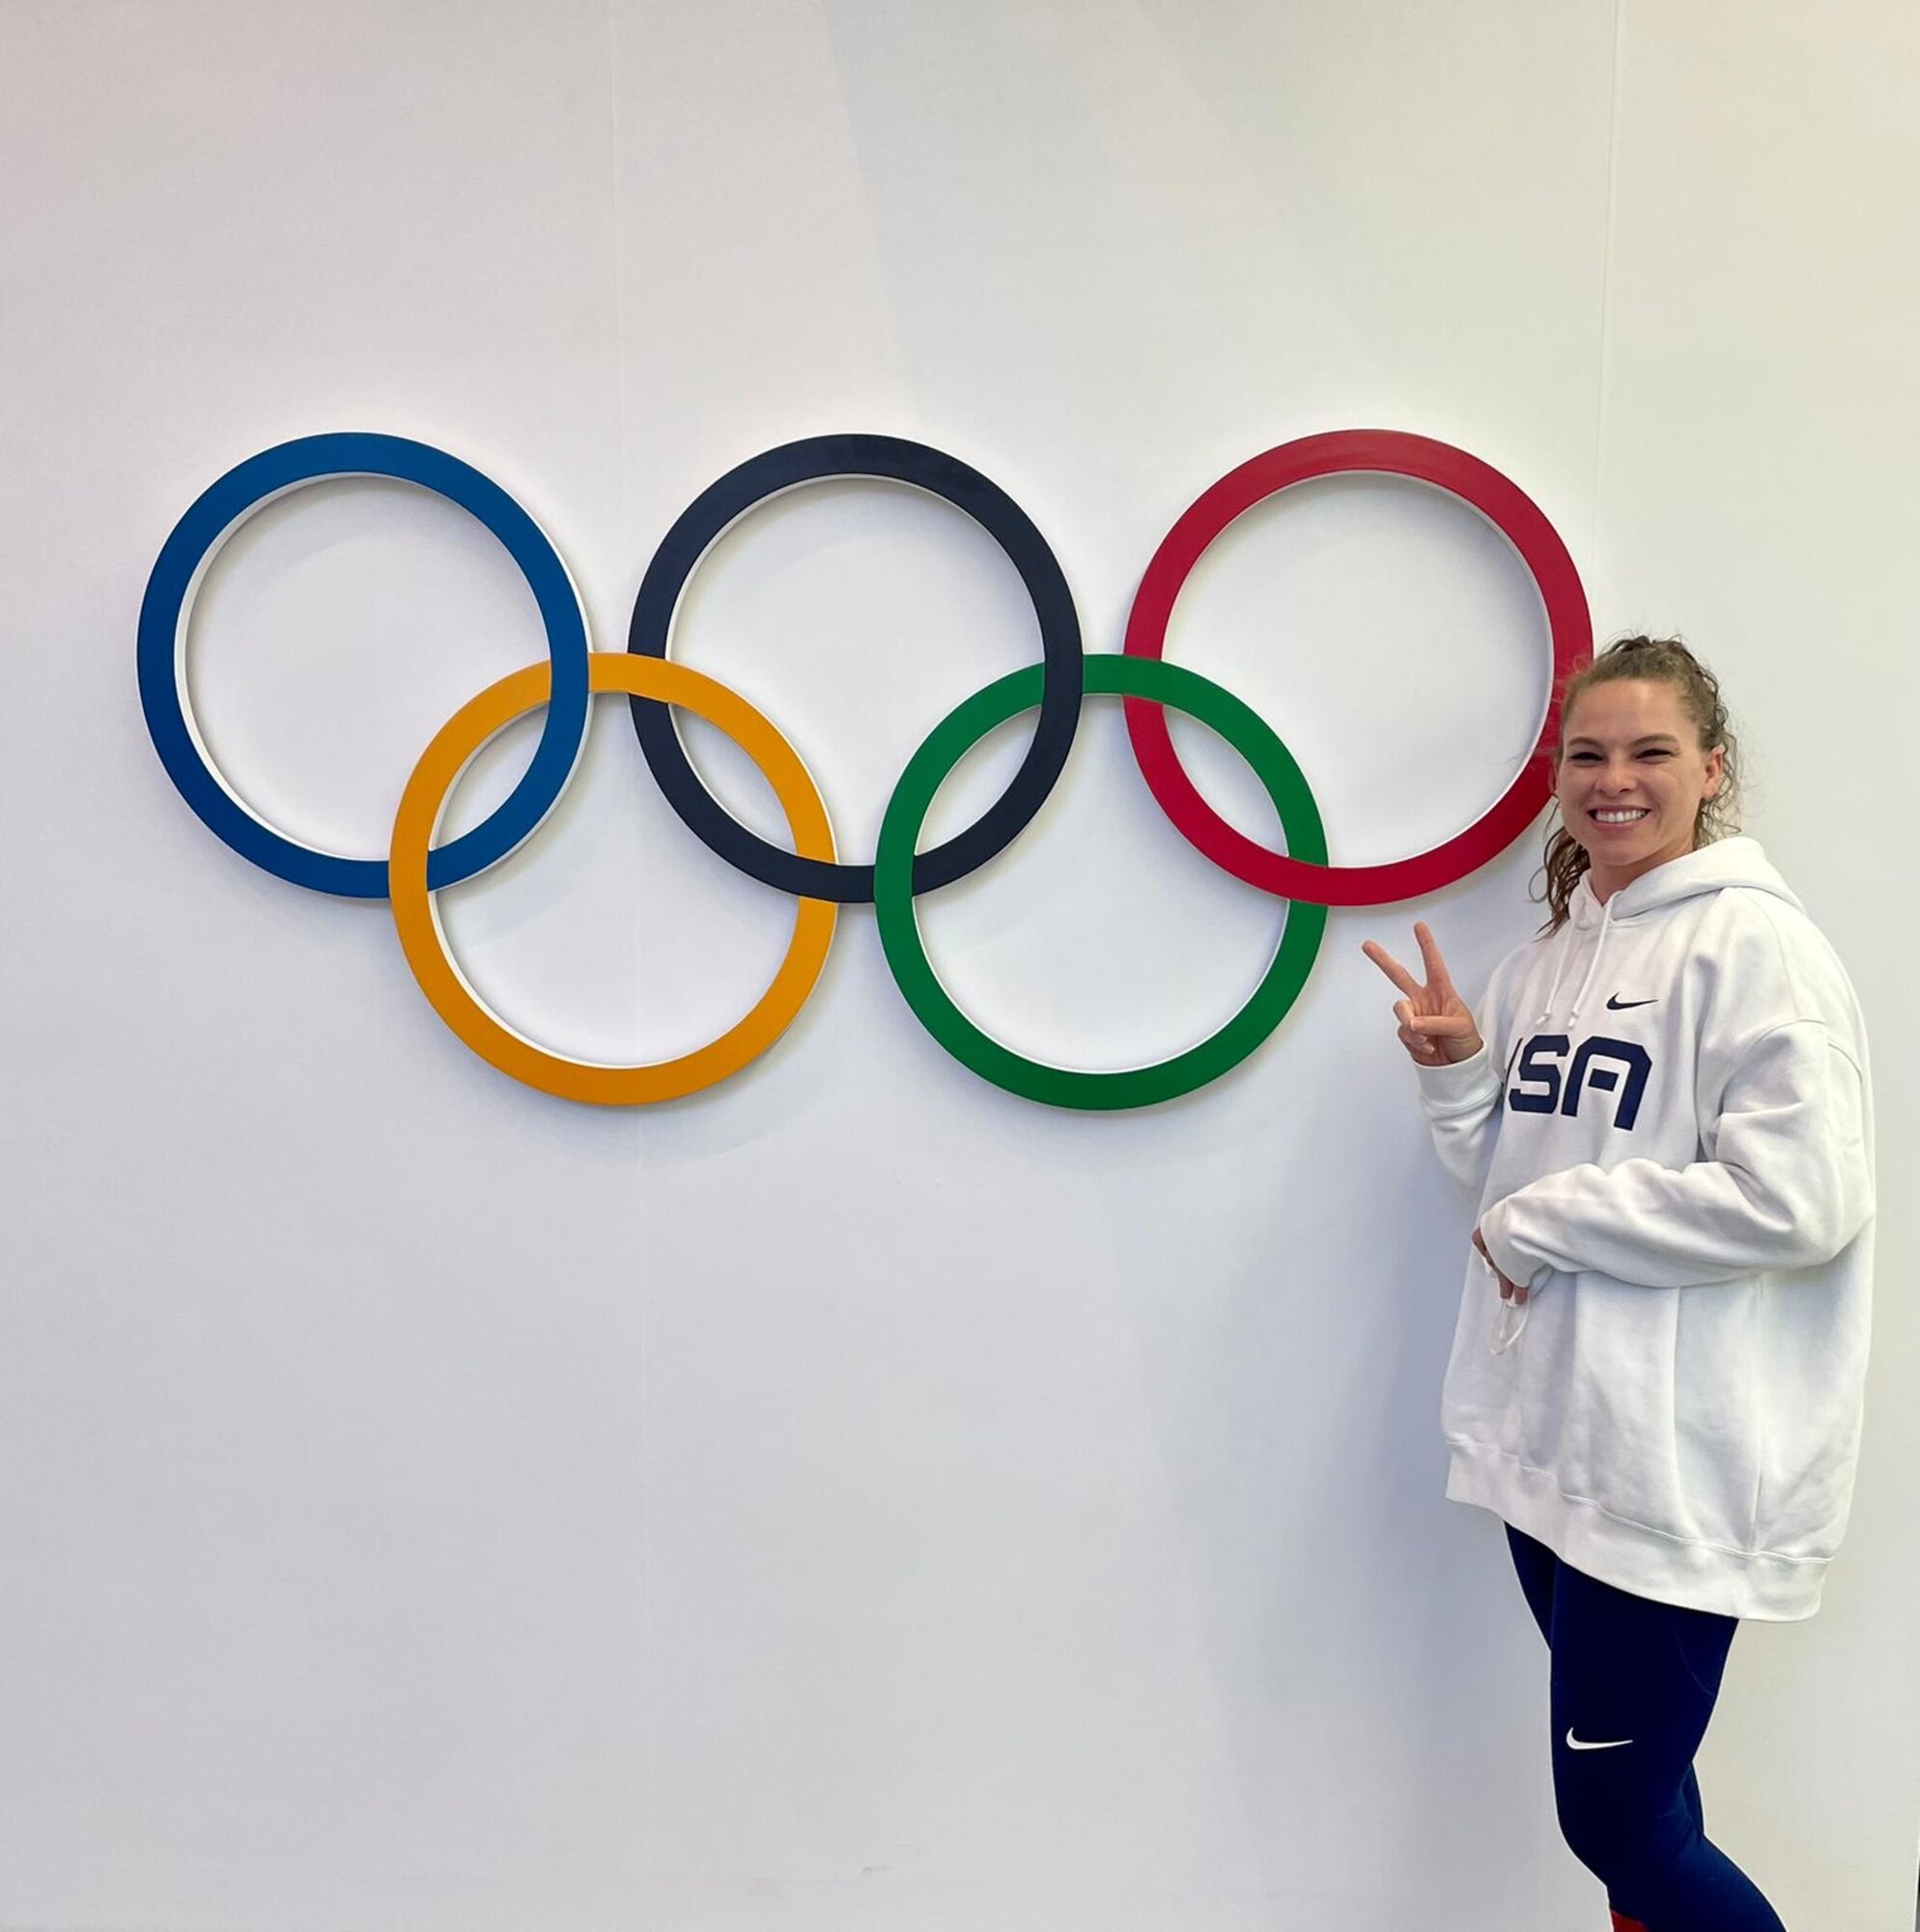 Airman 1st Class Kelly Curtis, 32, a member of the Department of the Air Force’s World Class Athlete Program (WCAP), finished 21 out of 25 in the winter Olympics in Beijing